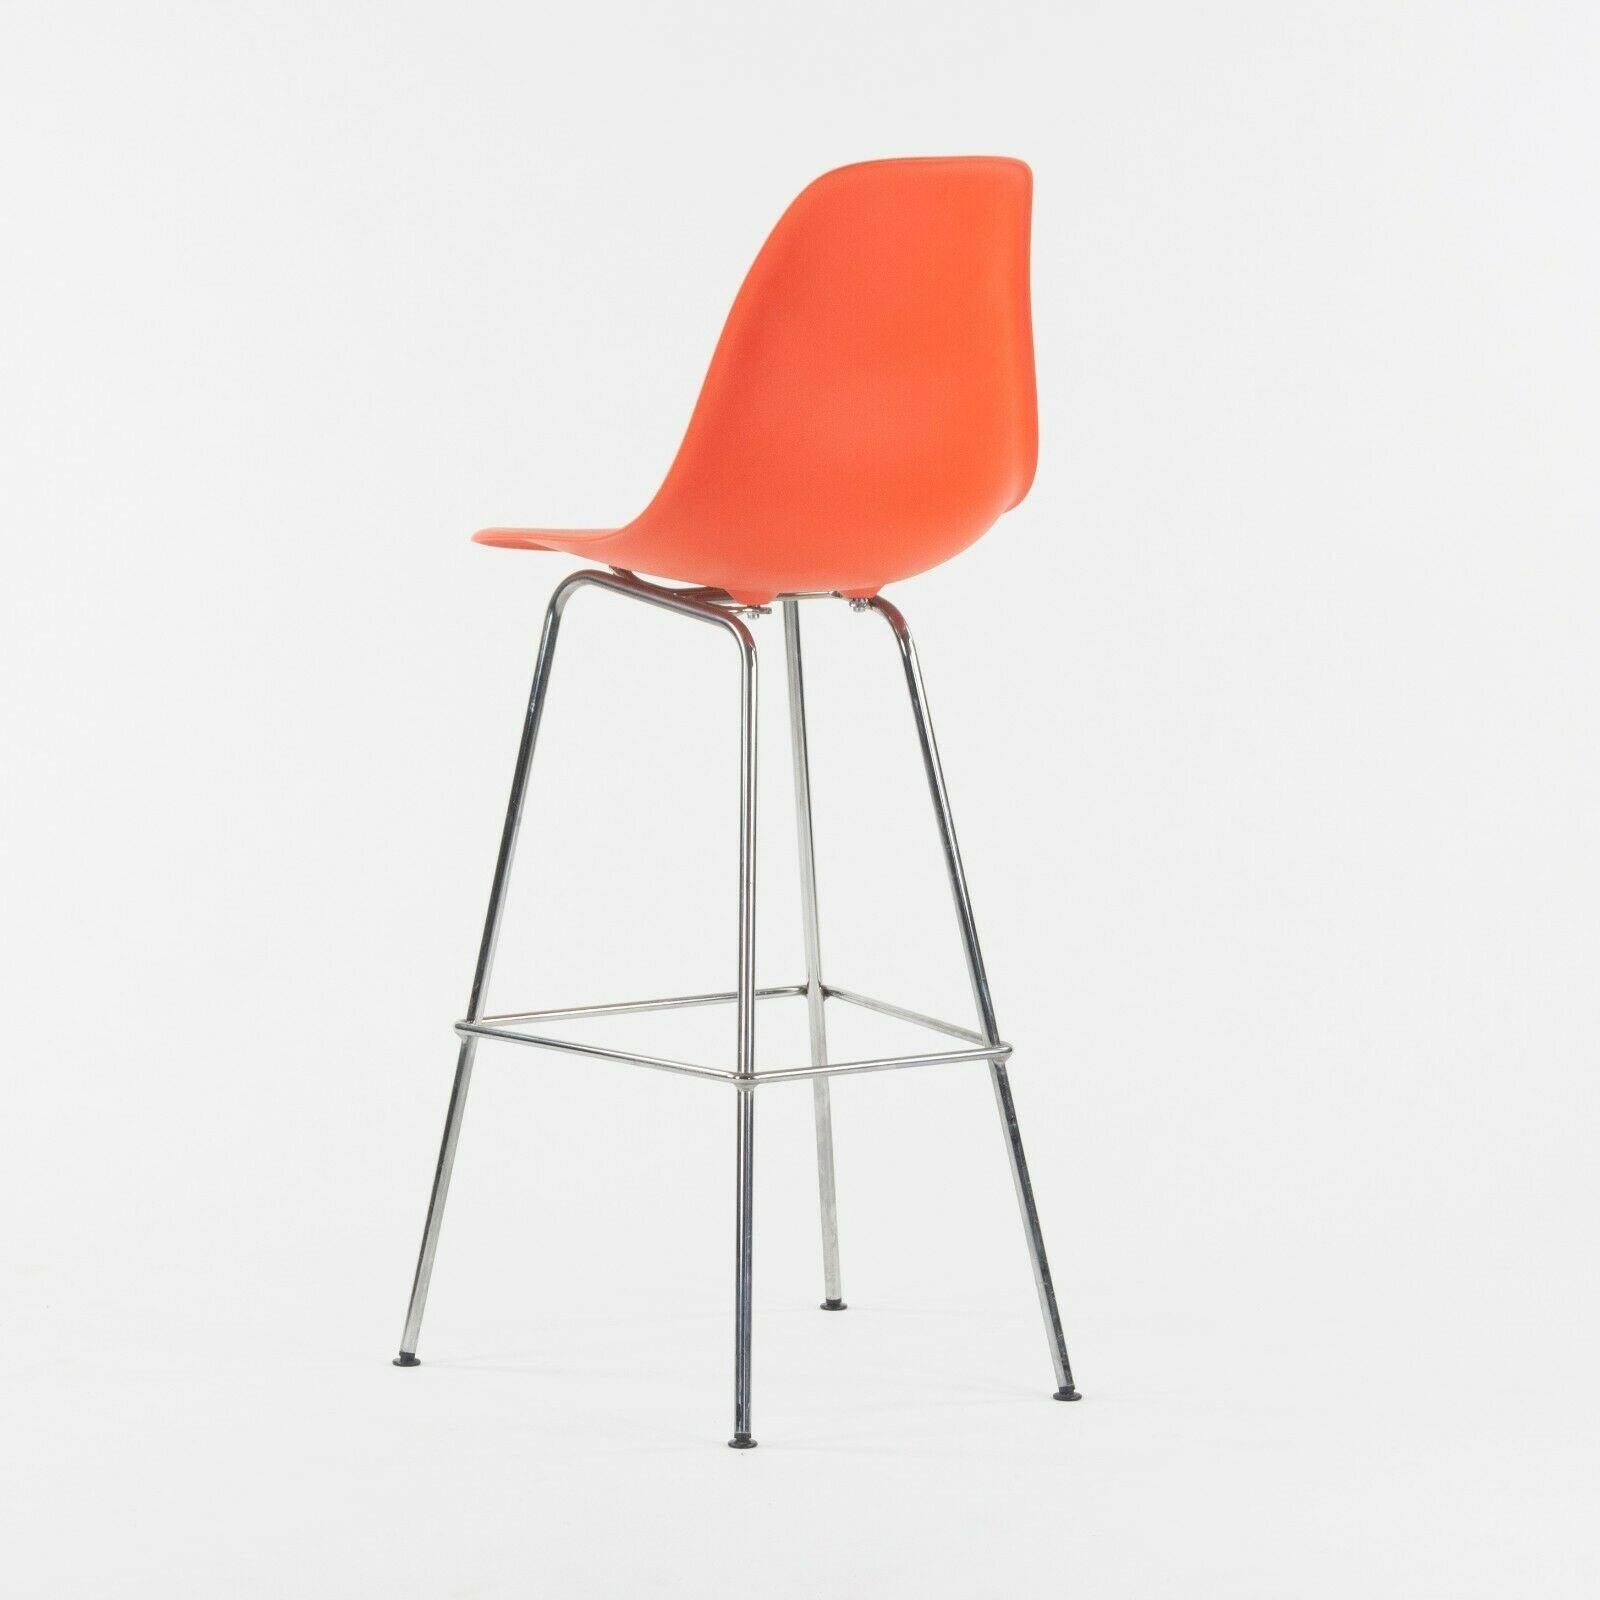 American Ray and Charles Eames Herman Miller Molded Shell Bar Stool Chair Red/Orange